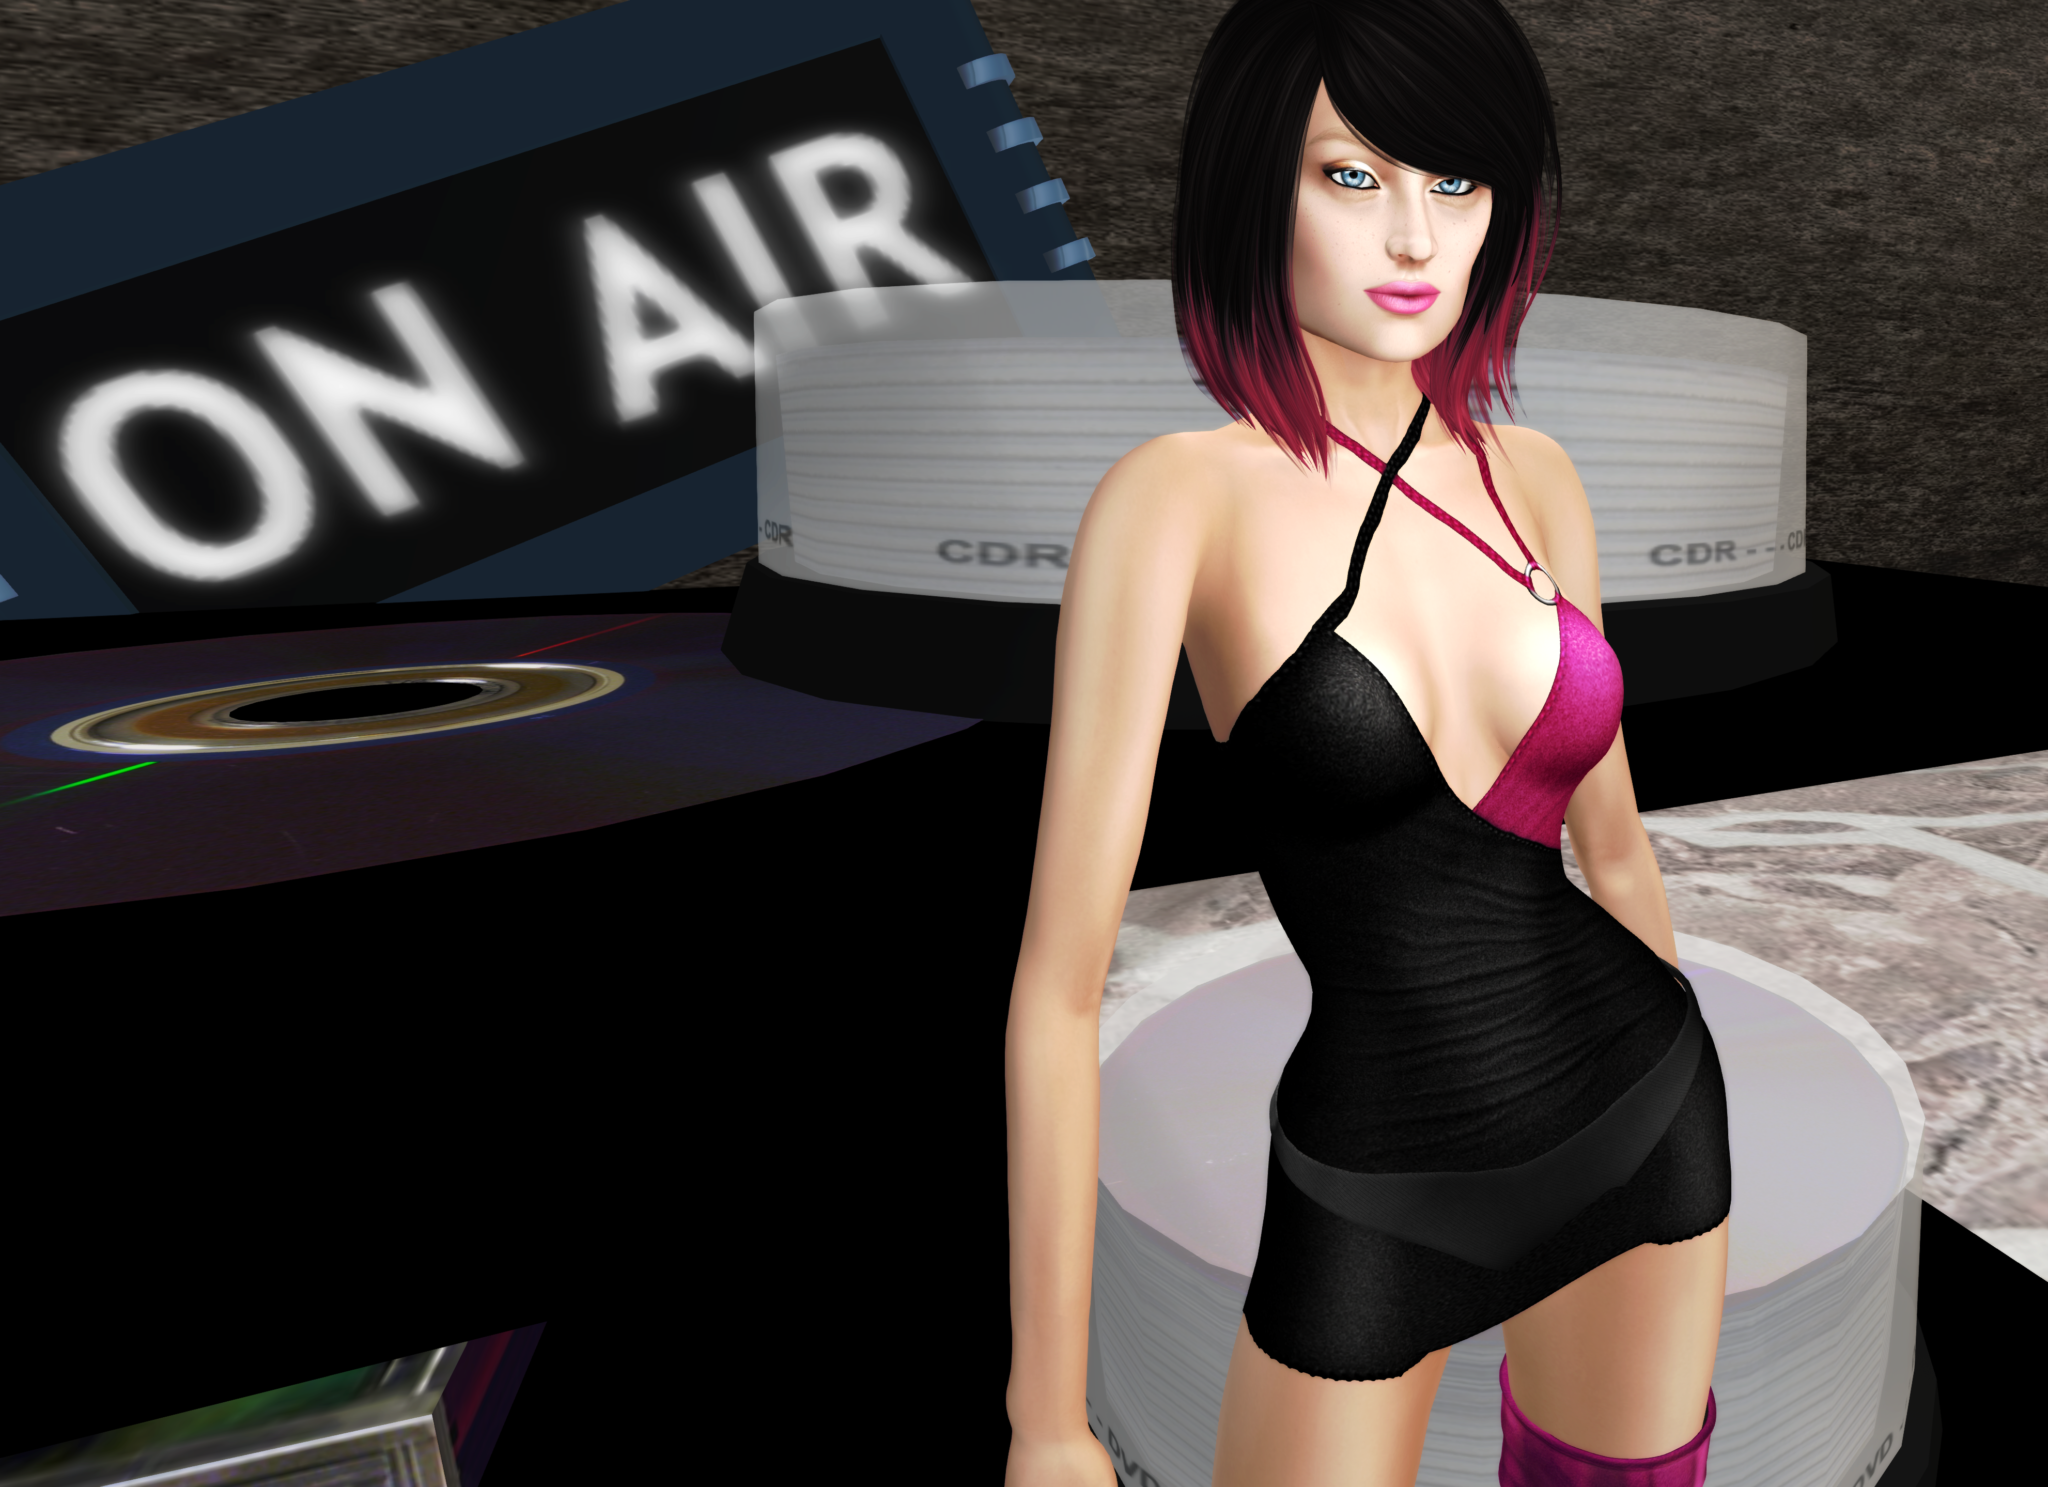 A second life avatar stands in her 1 hundred. dress in front of some CDs. She is wearing an alaskametro skin.